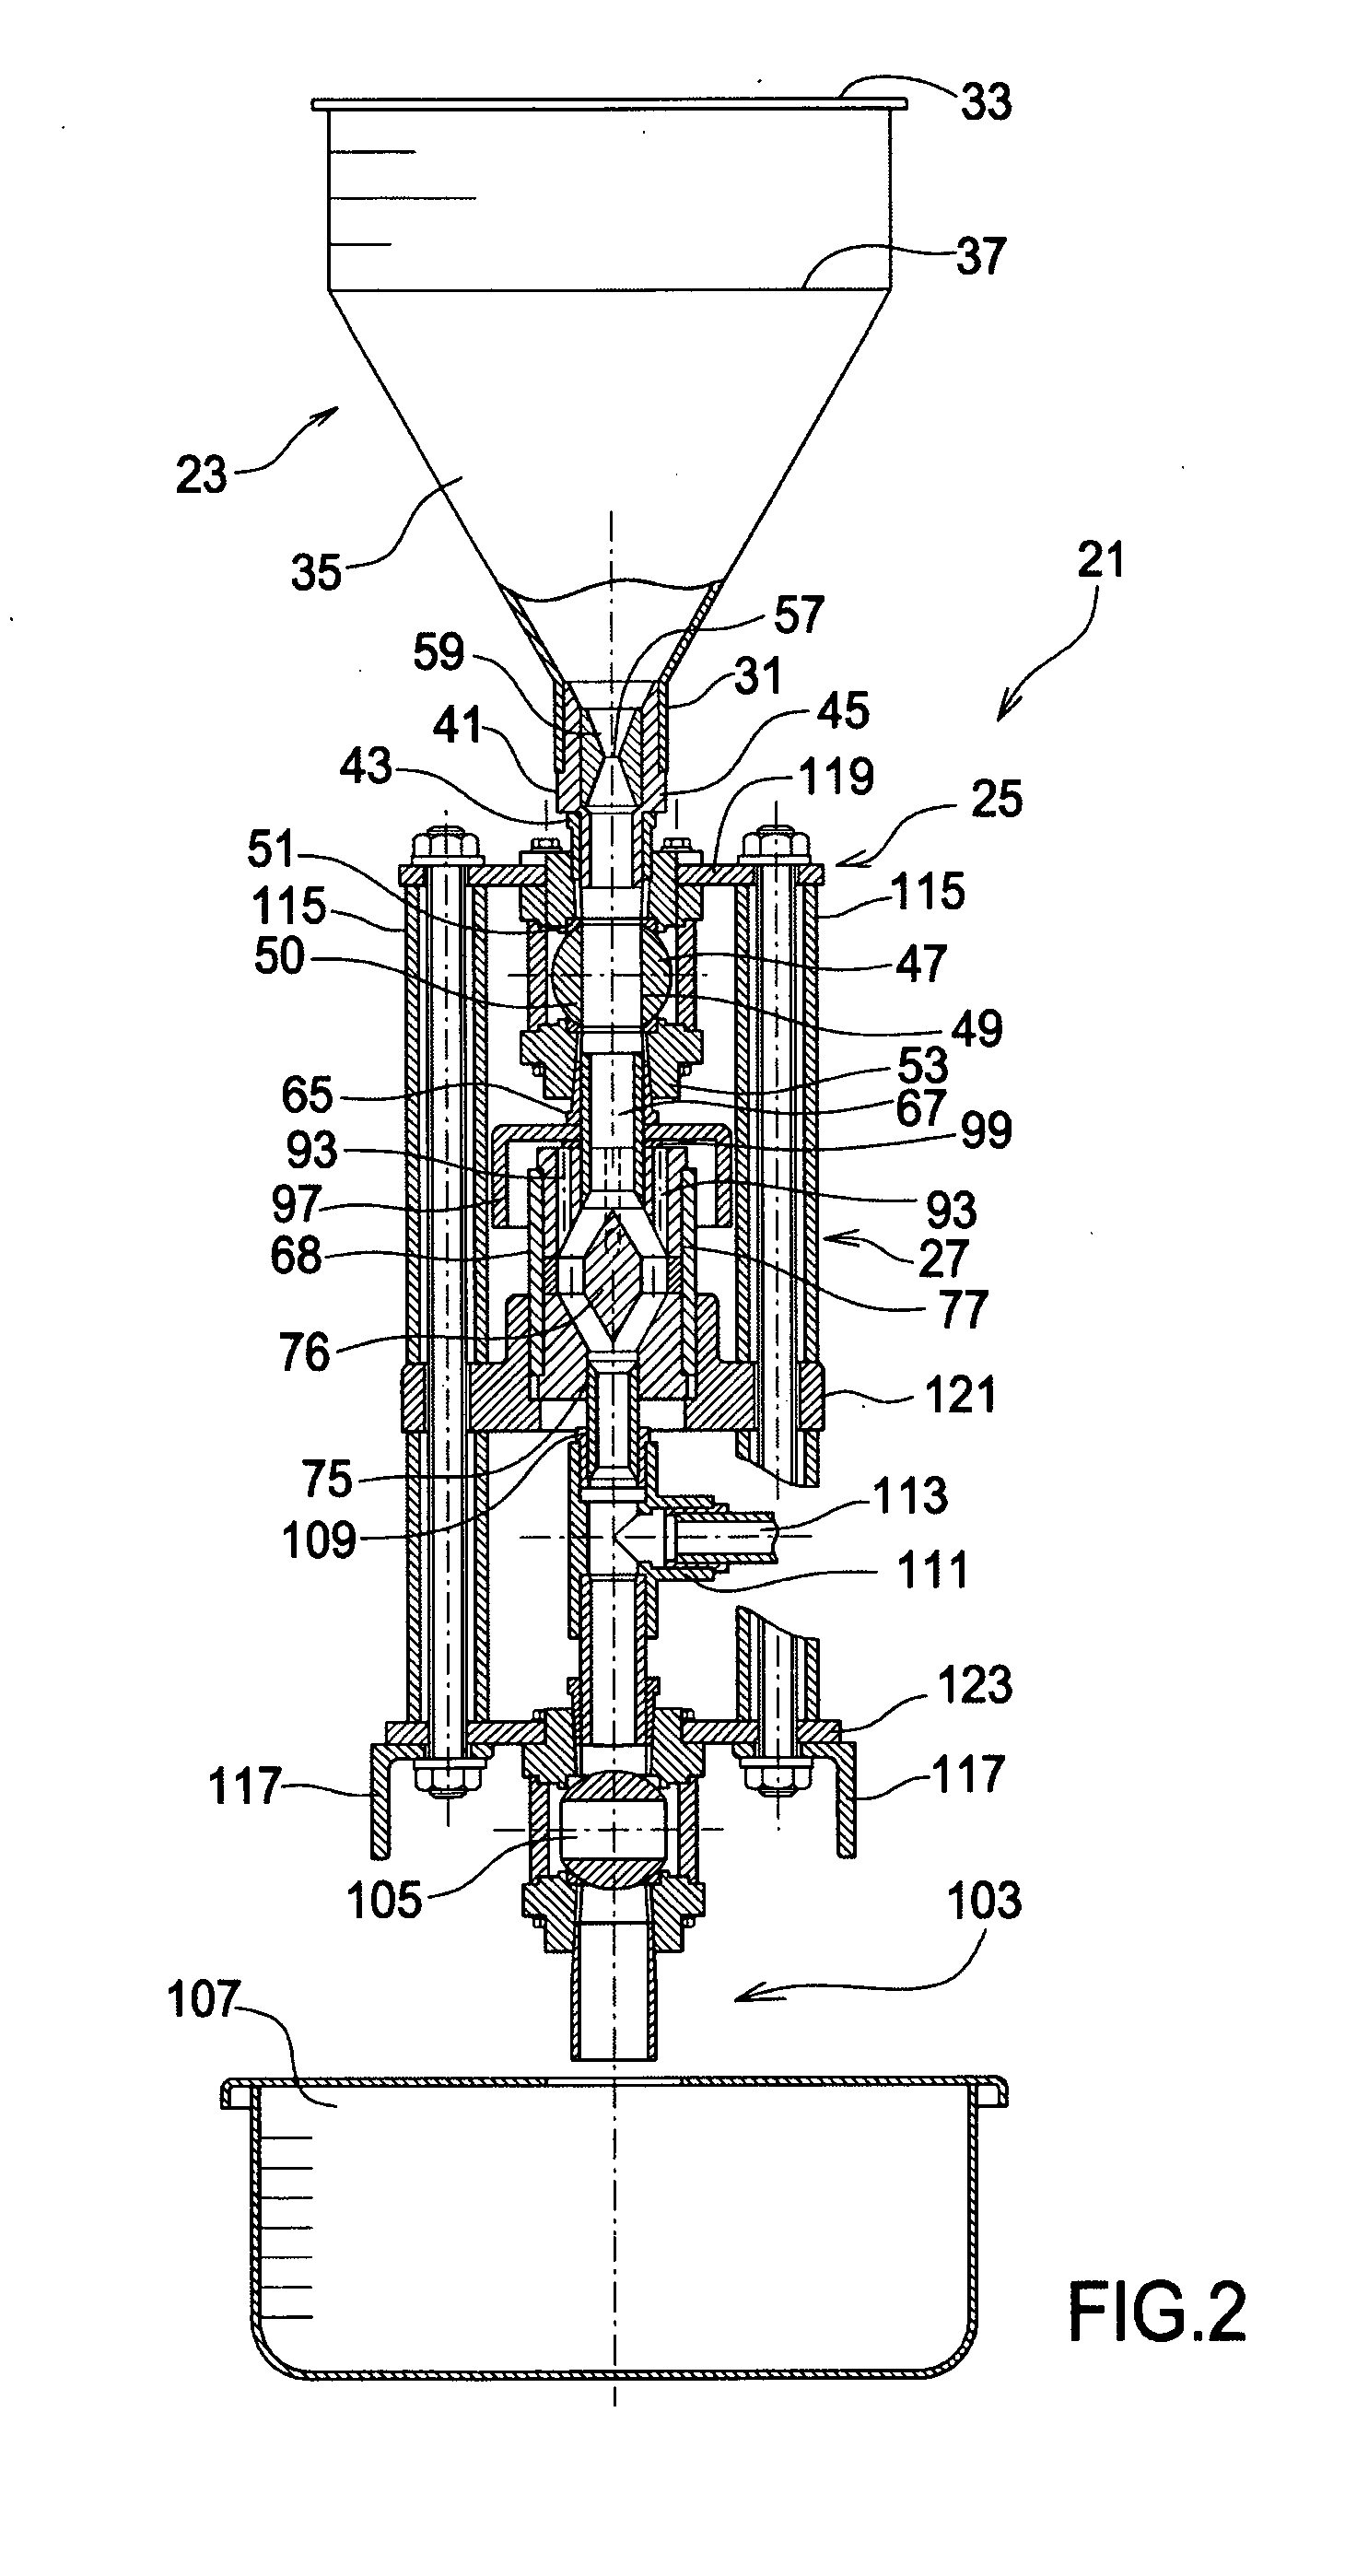 Apparatus and methods for entraining a substance in a fluid stream